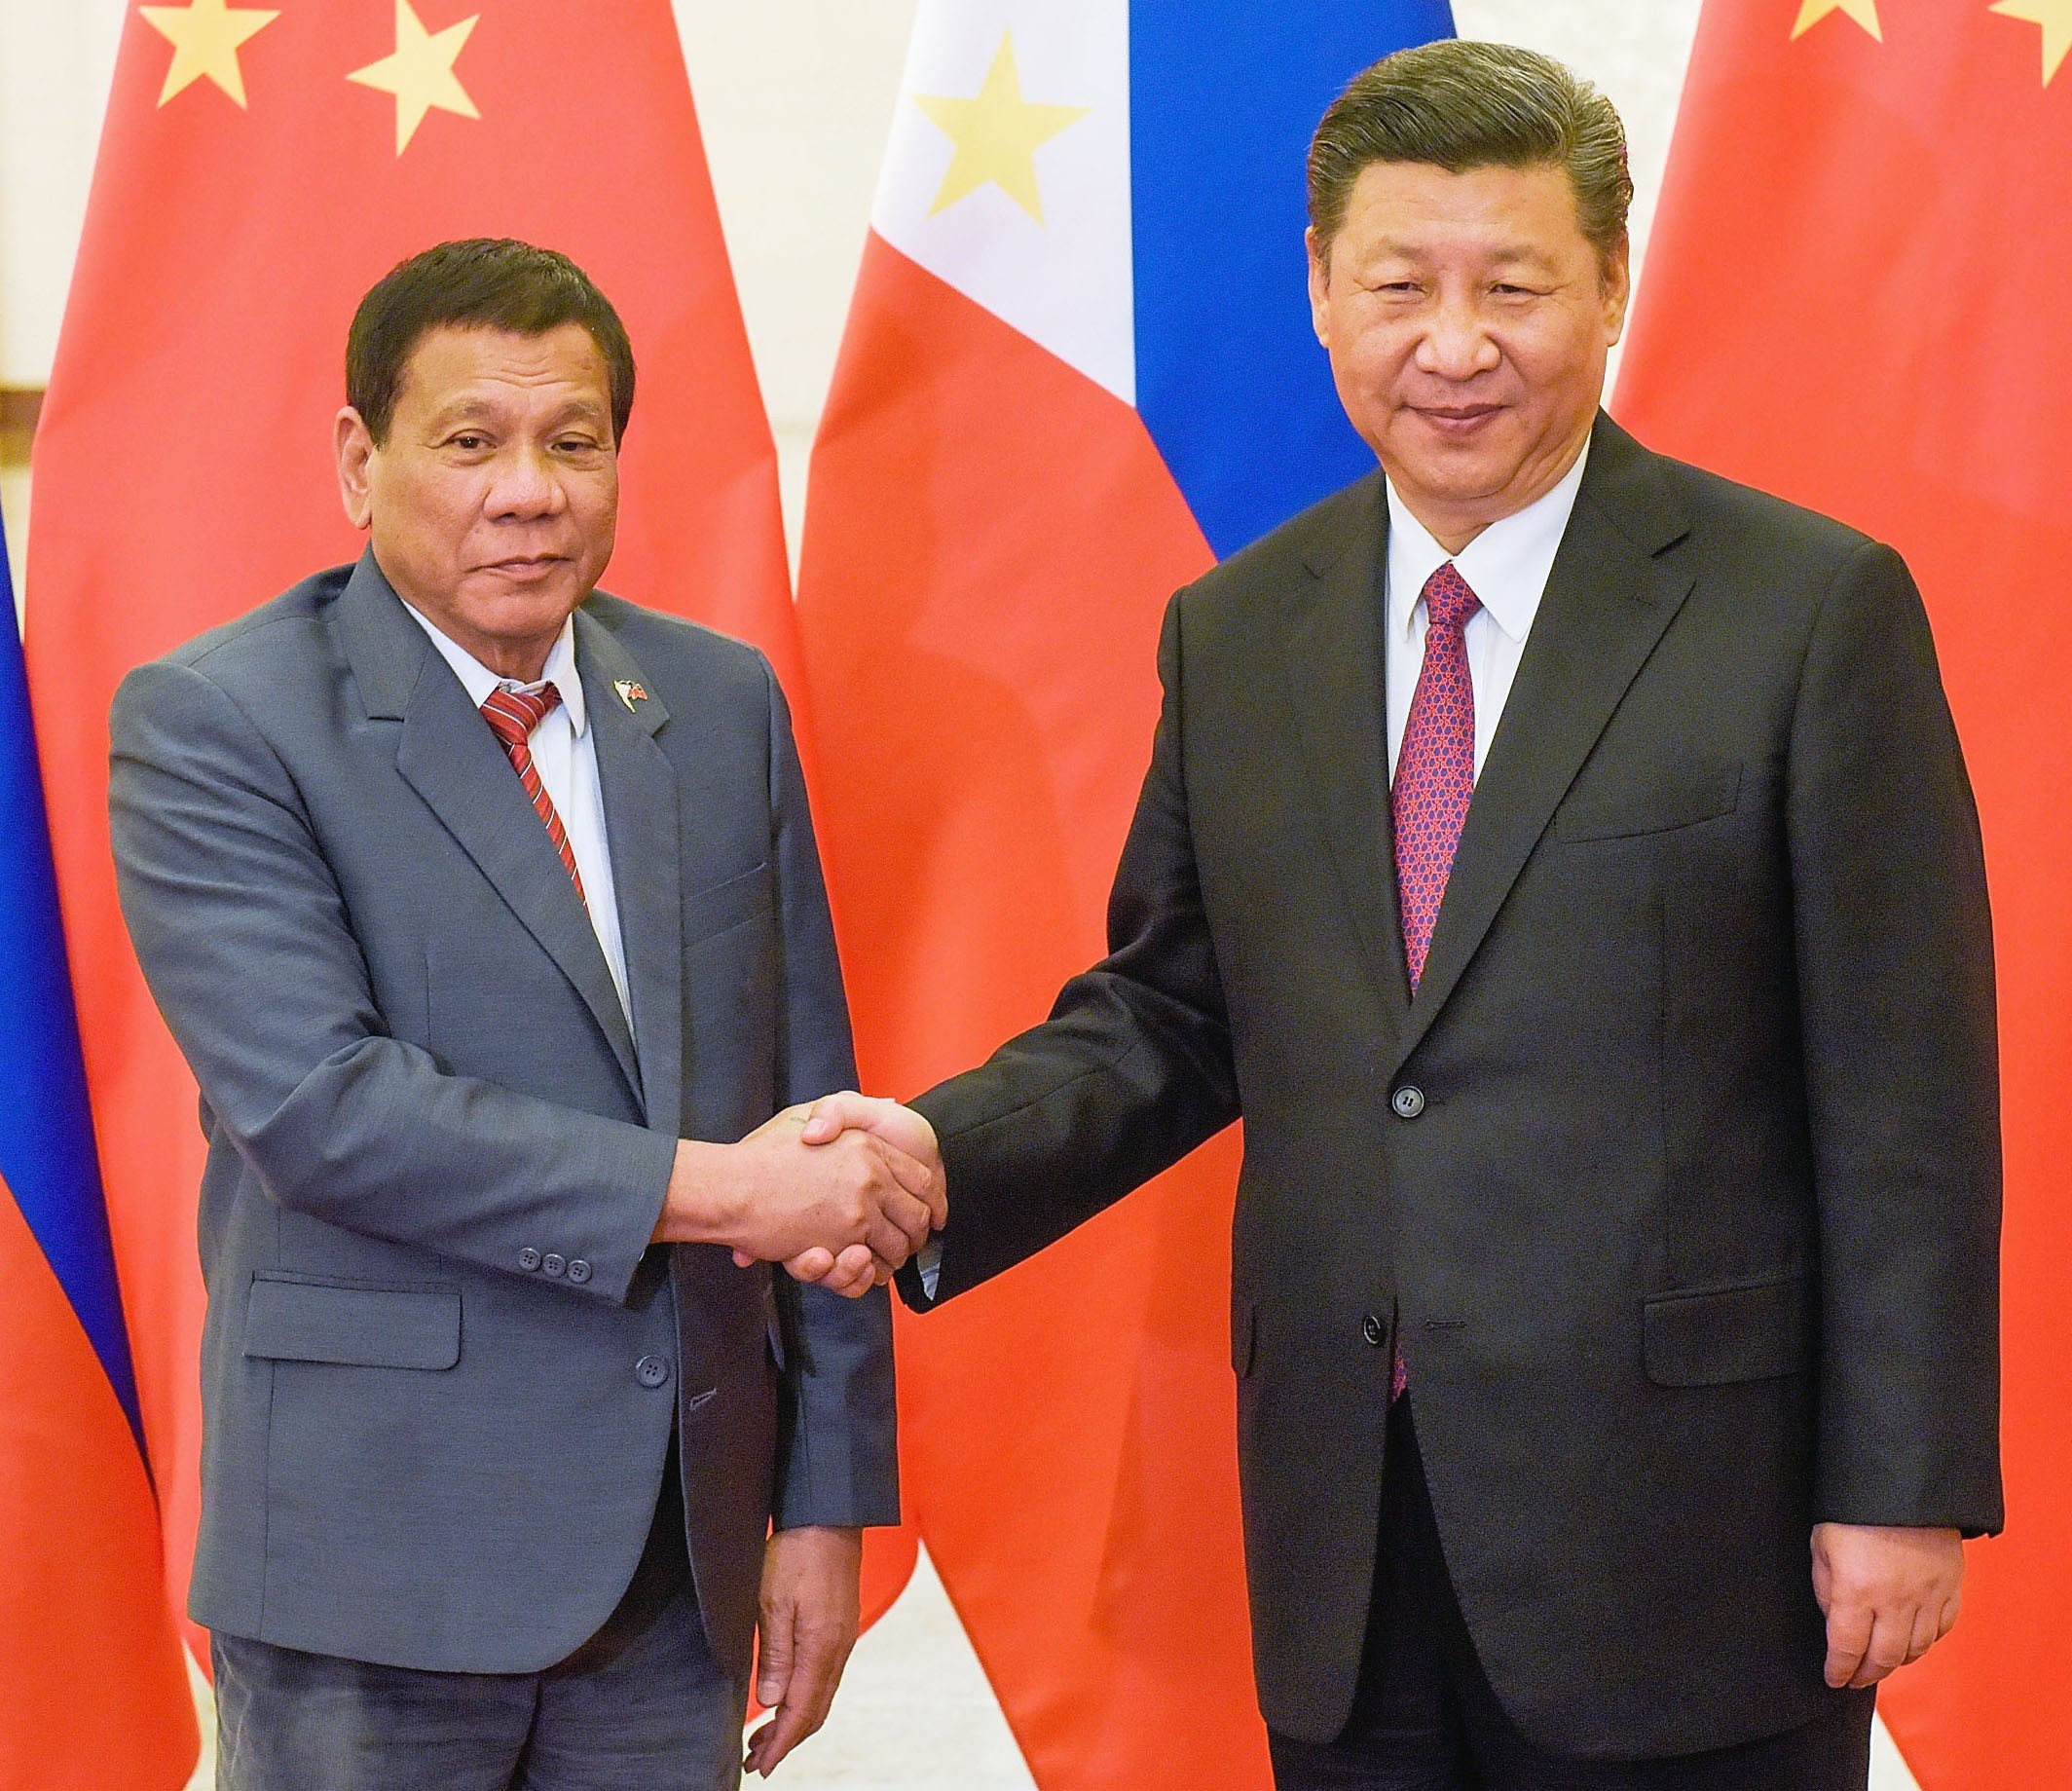 Philippine President Rodrigo Duterte and President Xi Jinping shake hands at Beijing's Great Hall of the People on Monday. Photo: Kyodo